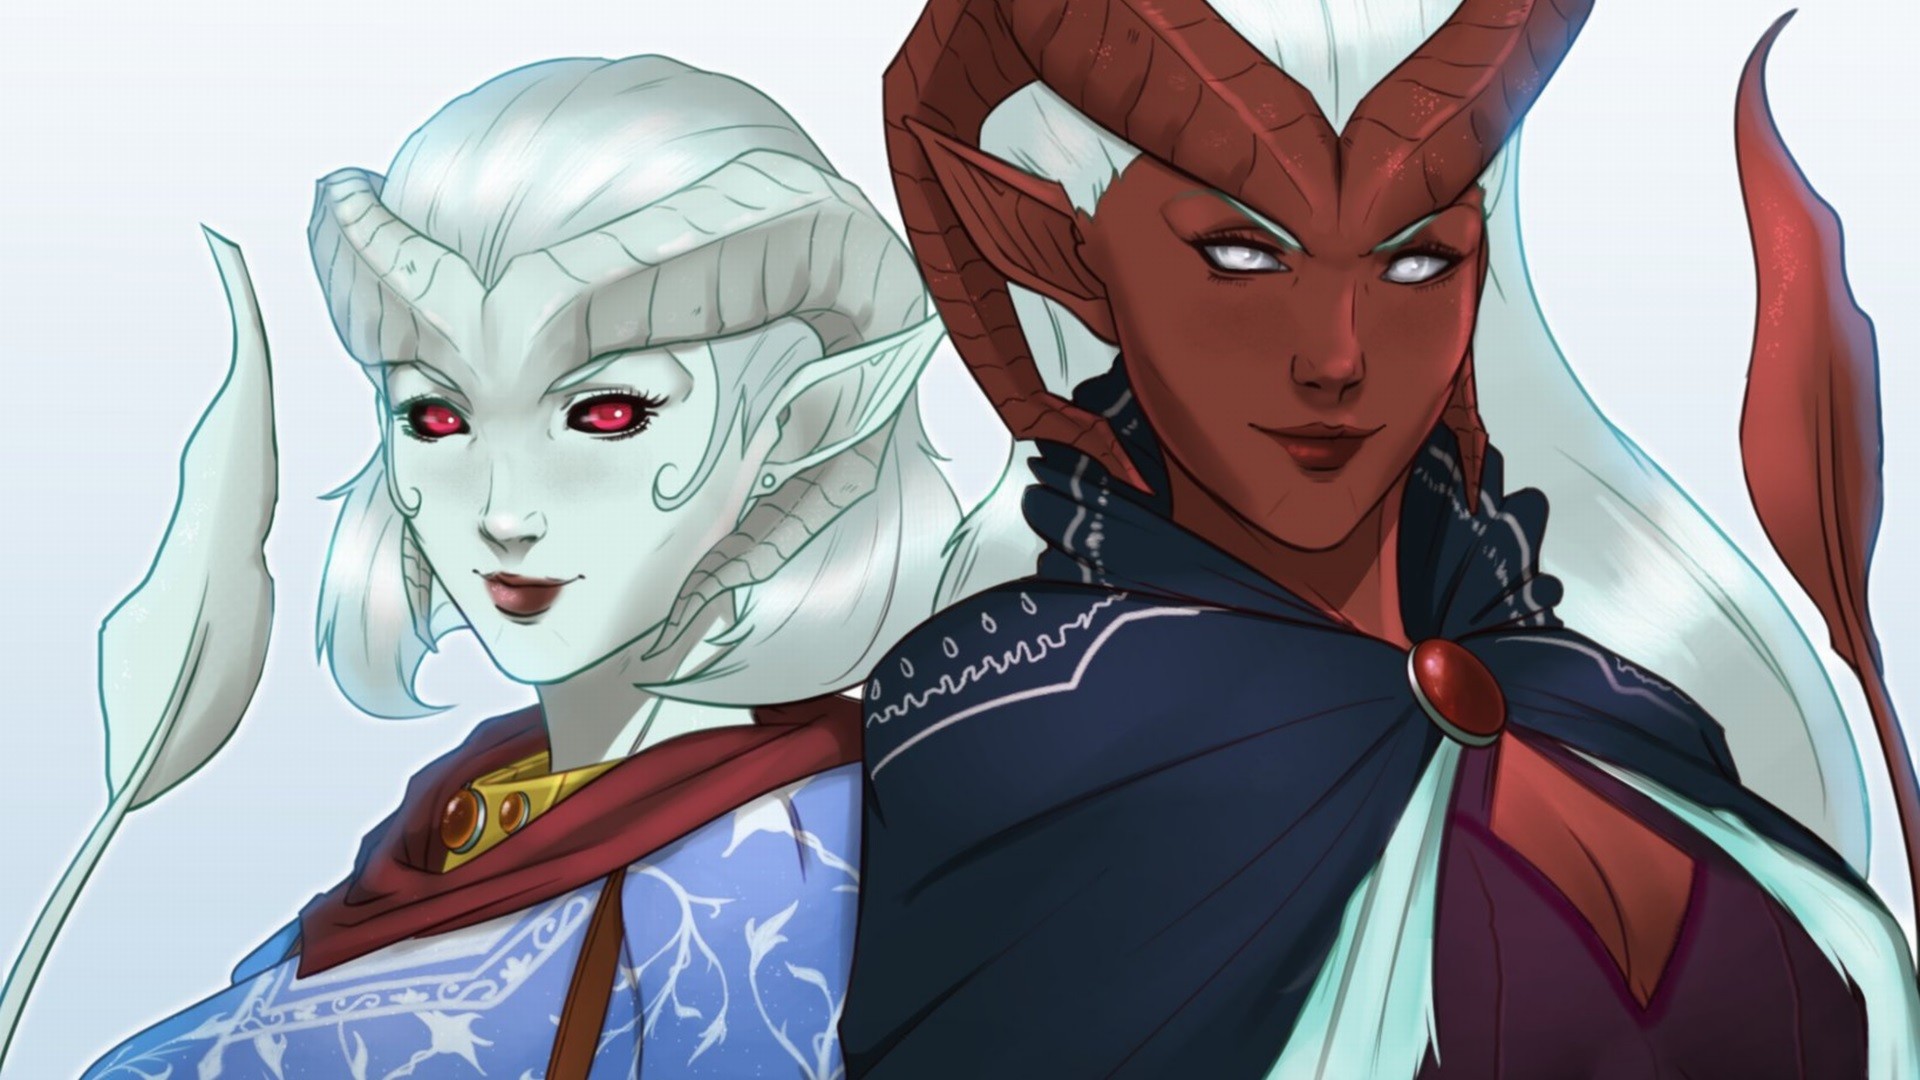 General 1920x1080 Critical Role tiefling white hair fan art fantasy art fantasy girl two women horns pointy ears white background simple background